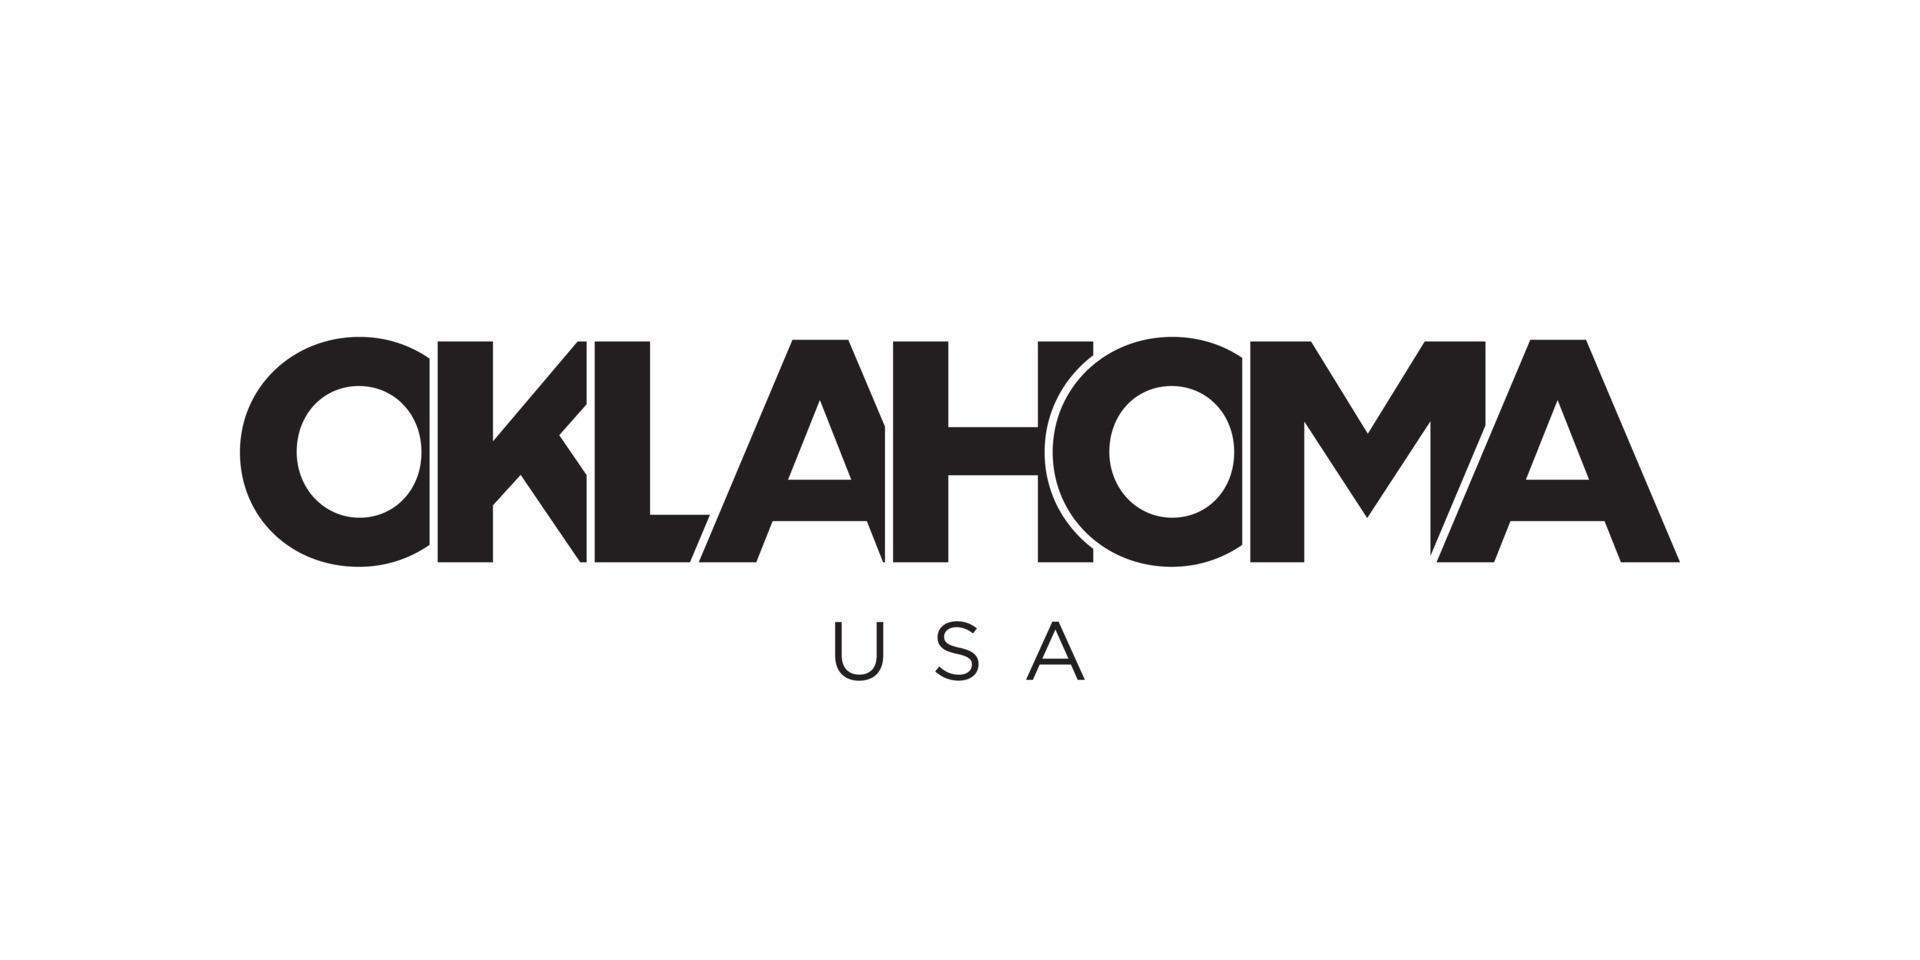 Oklahoma, USA typography slogan design. America logo with graphic city lettering for print and web. vector